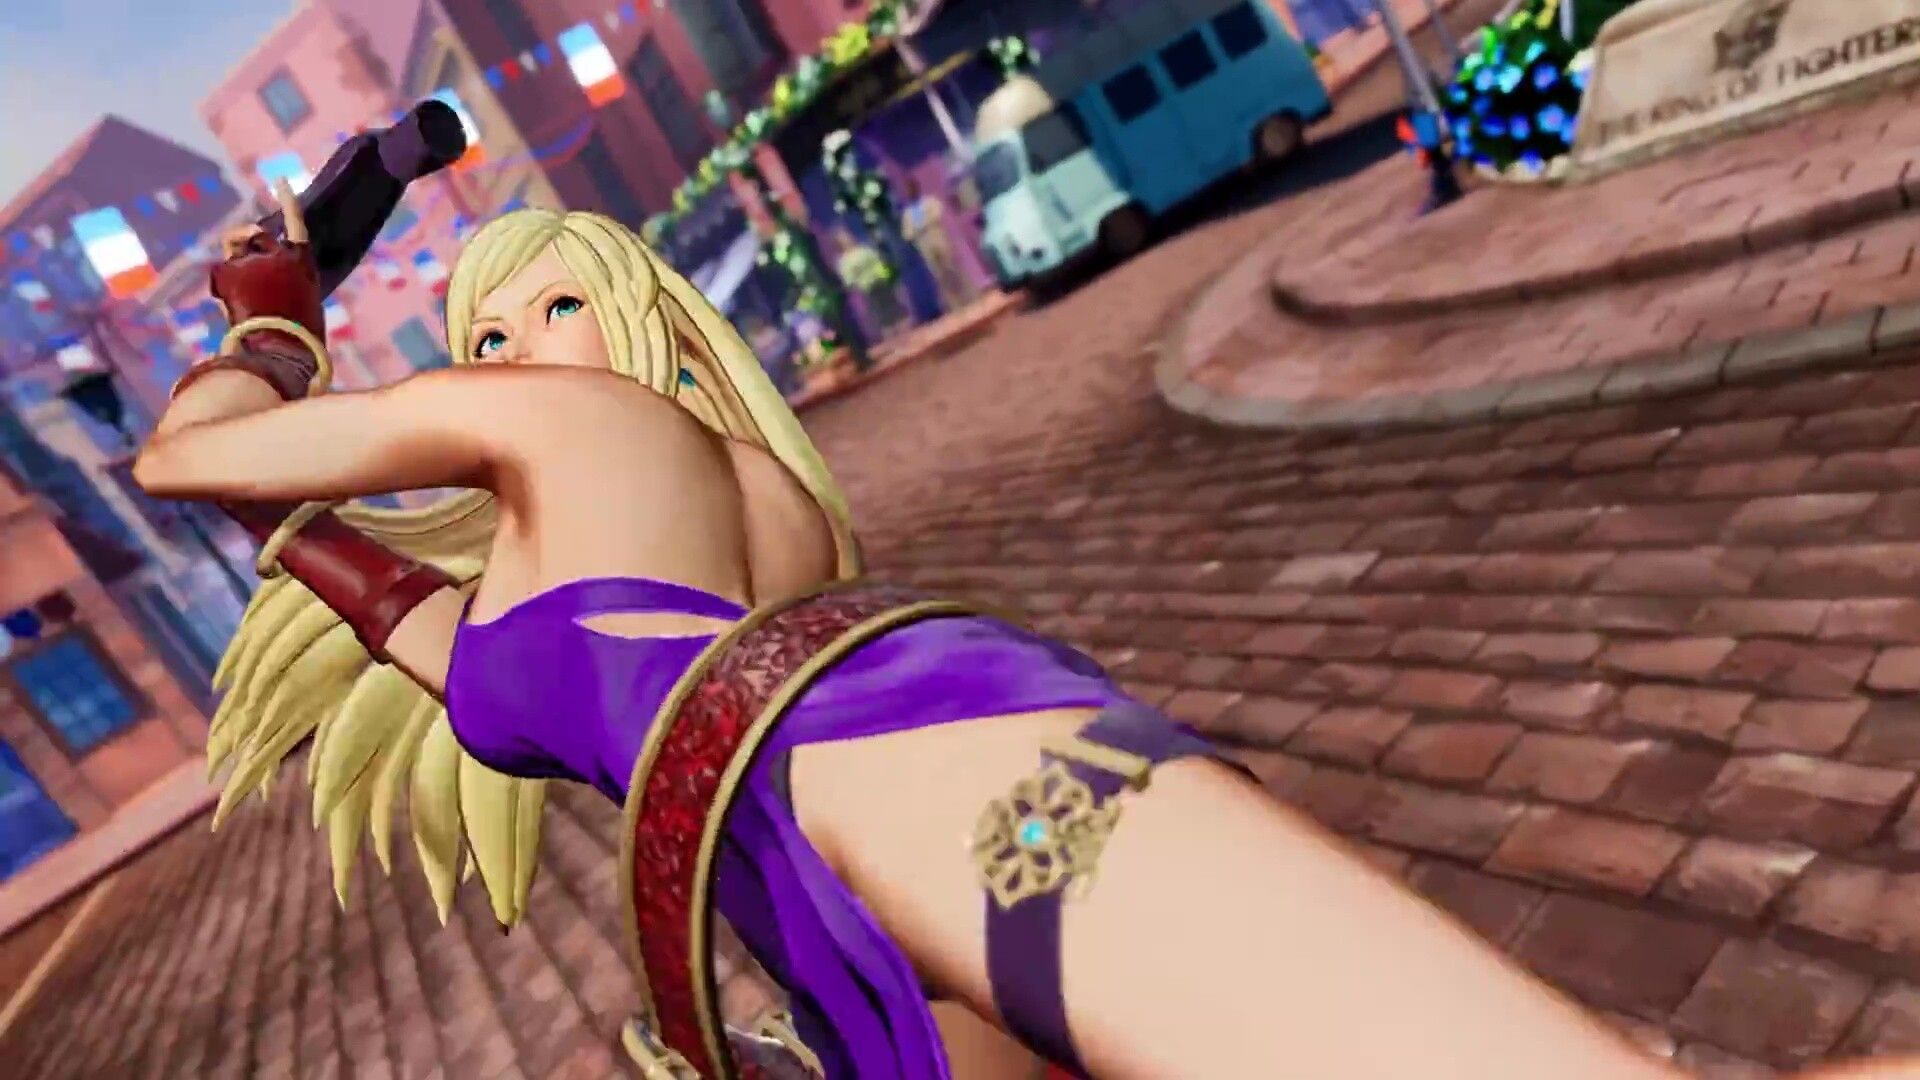 THE KING OF FIGHTERS XV B. Jenny enters the DLC in an erotic dress with and rounded thighs 19